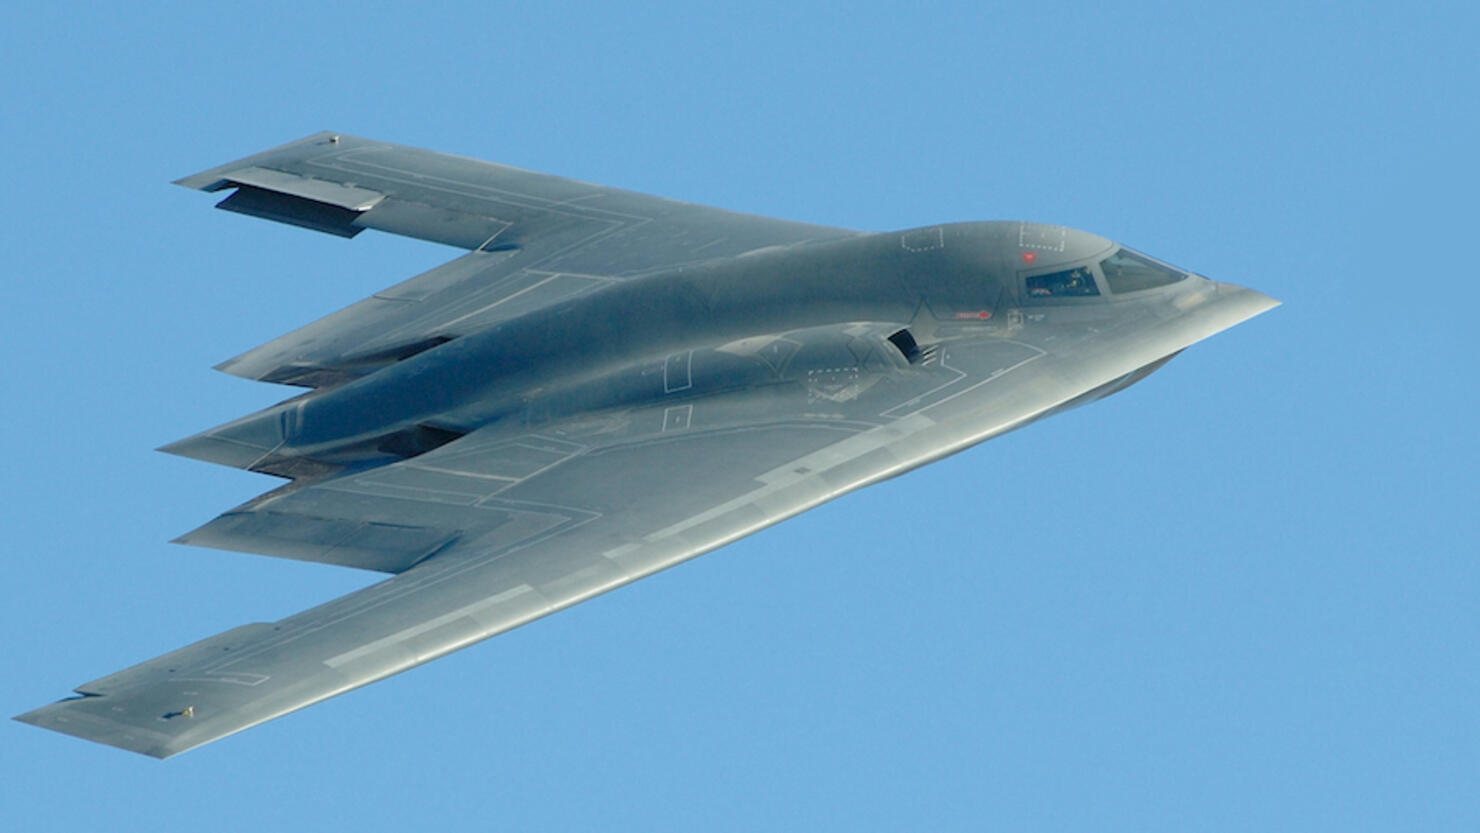 Close-up photo of a B-2 stealth bomber in flight